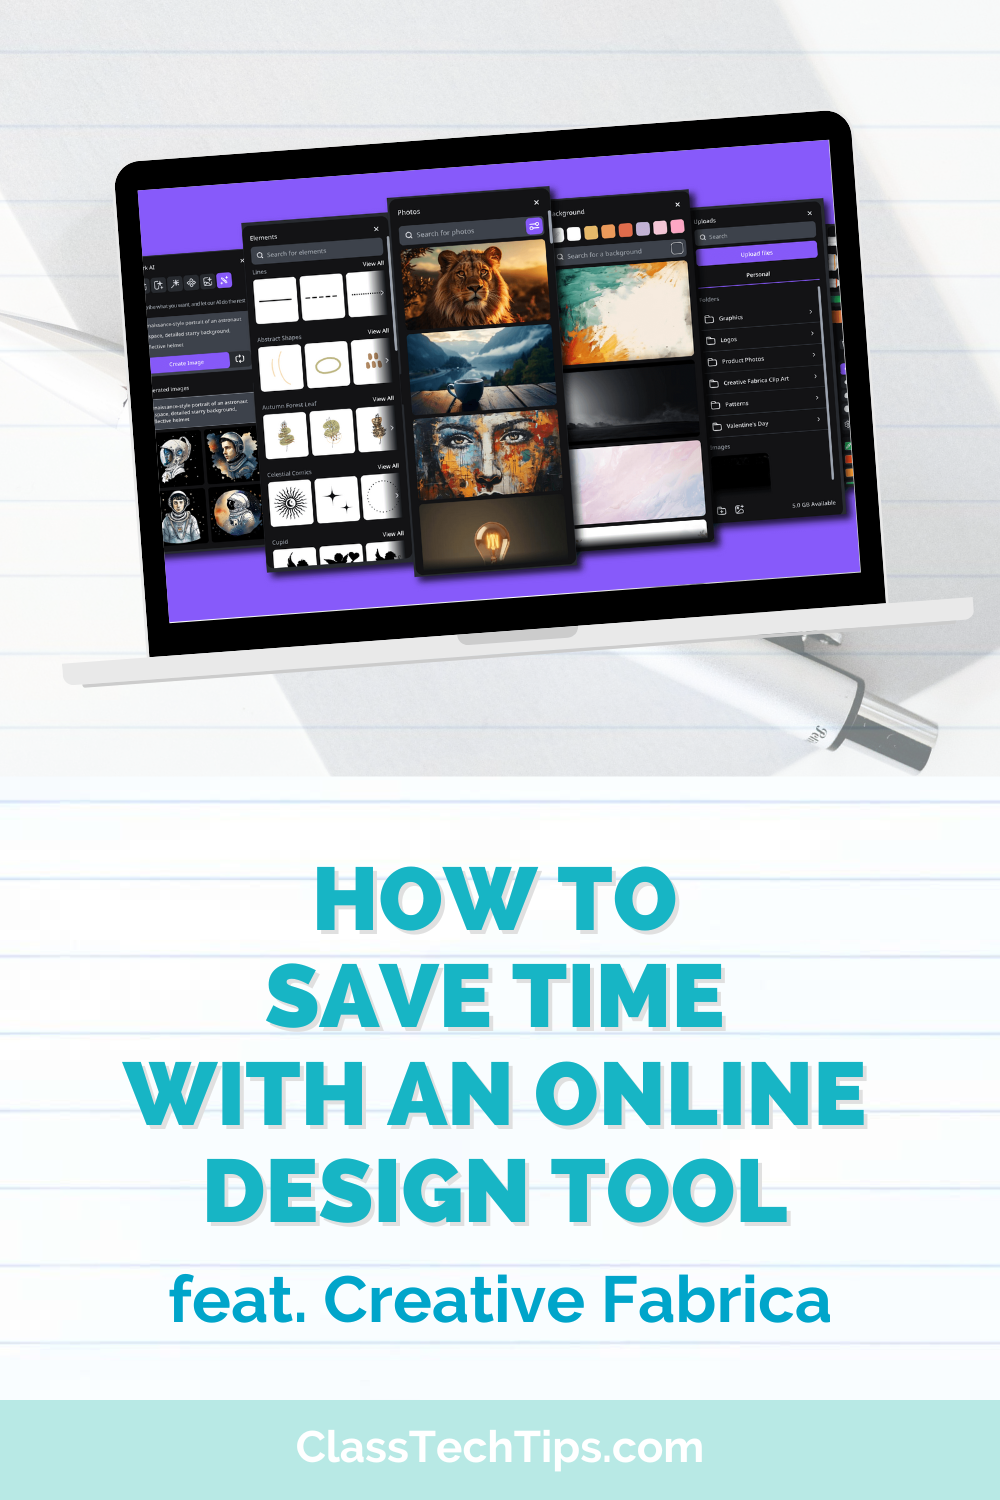 A tablet displays the Creative Fabrica online design tool interface with various graphic elements, alongside text "How to Save Time with an Online Design Tool feat. Creative Fabrica" for educators.